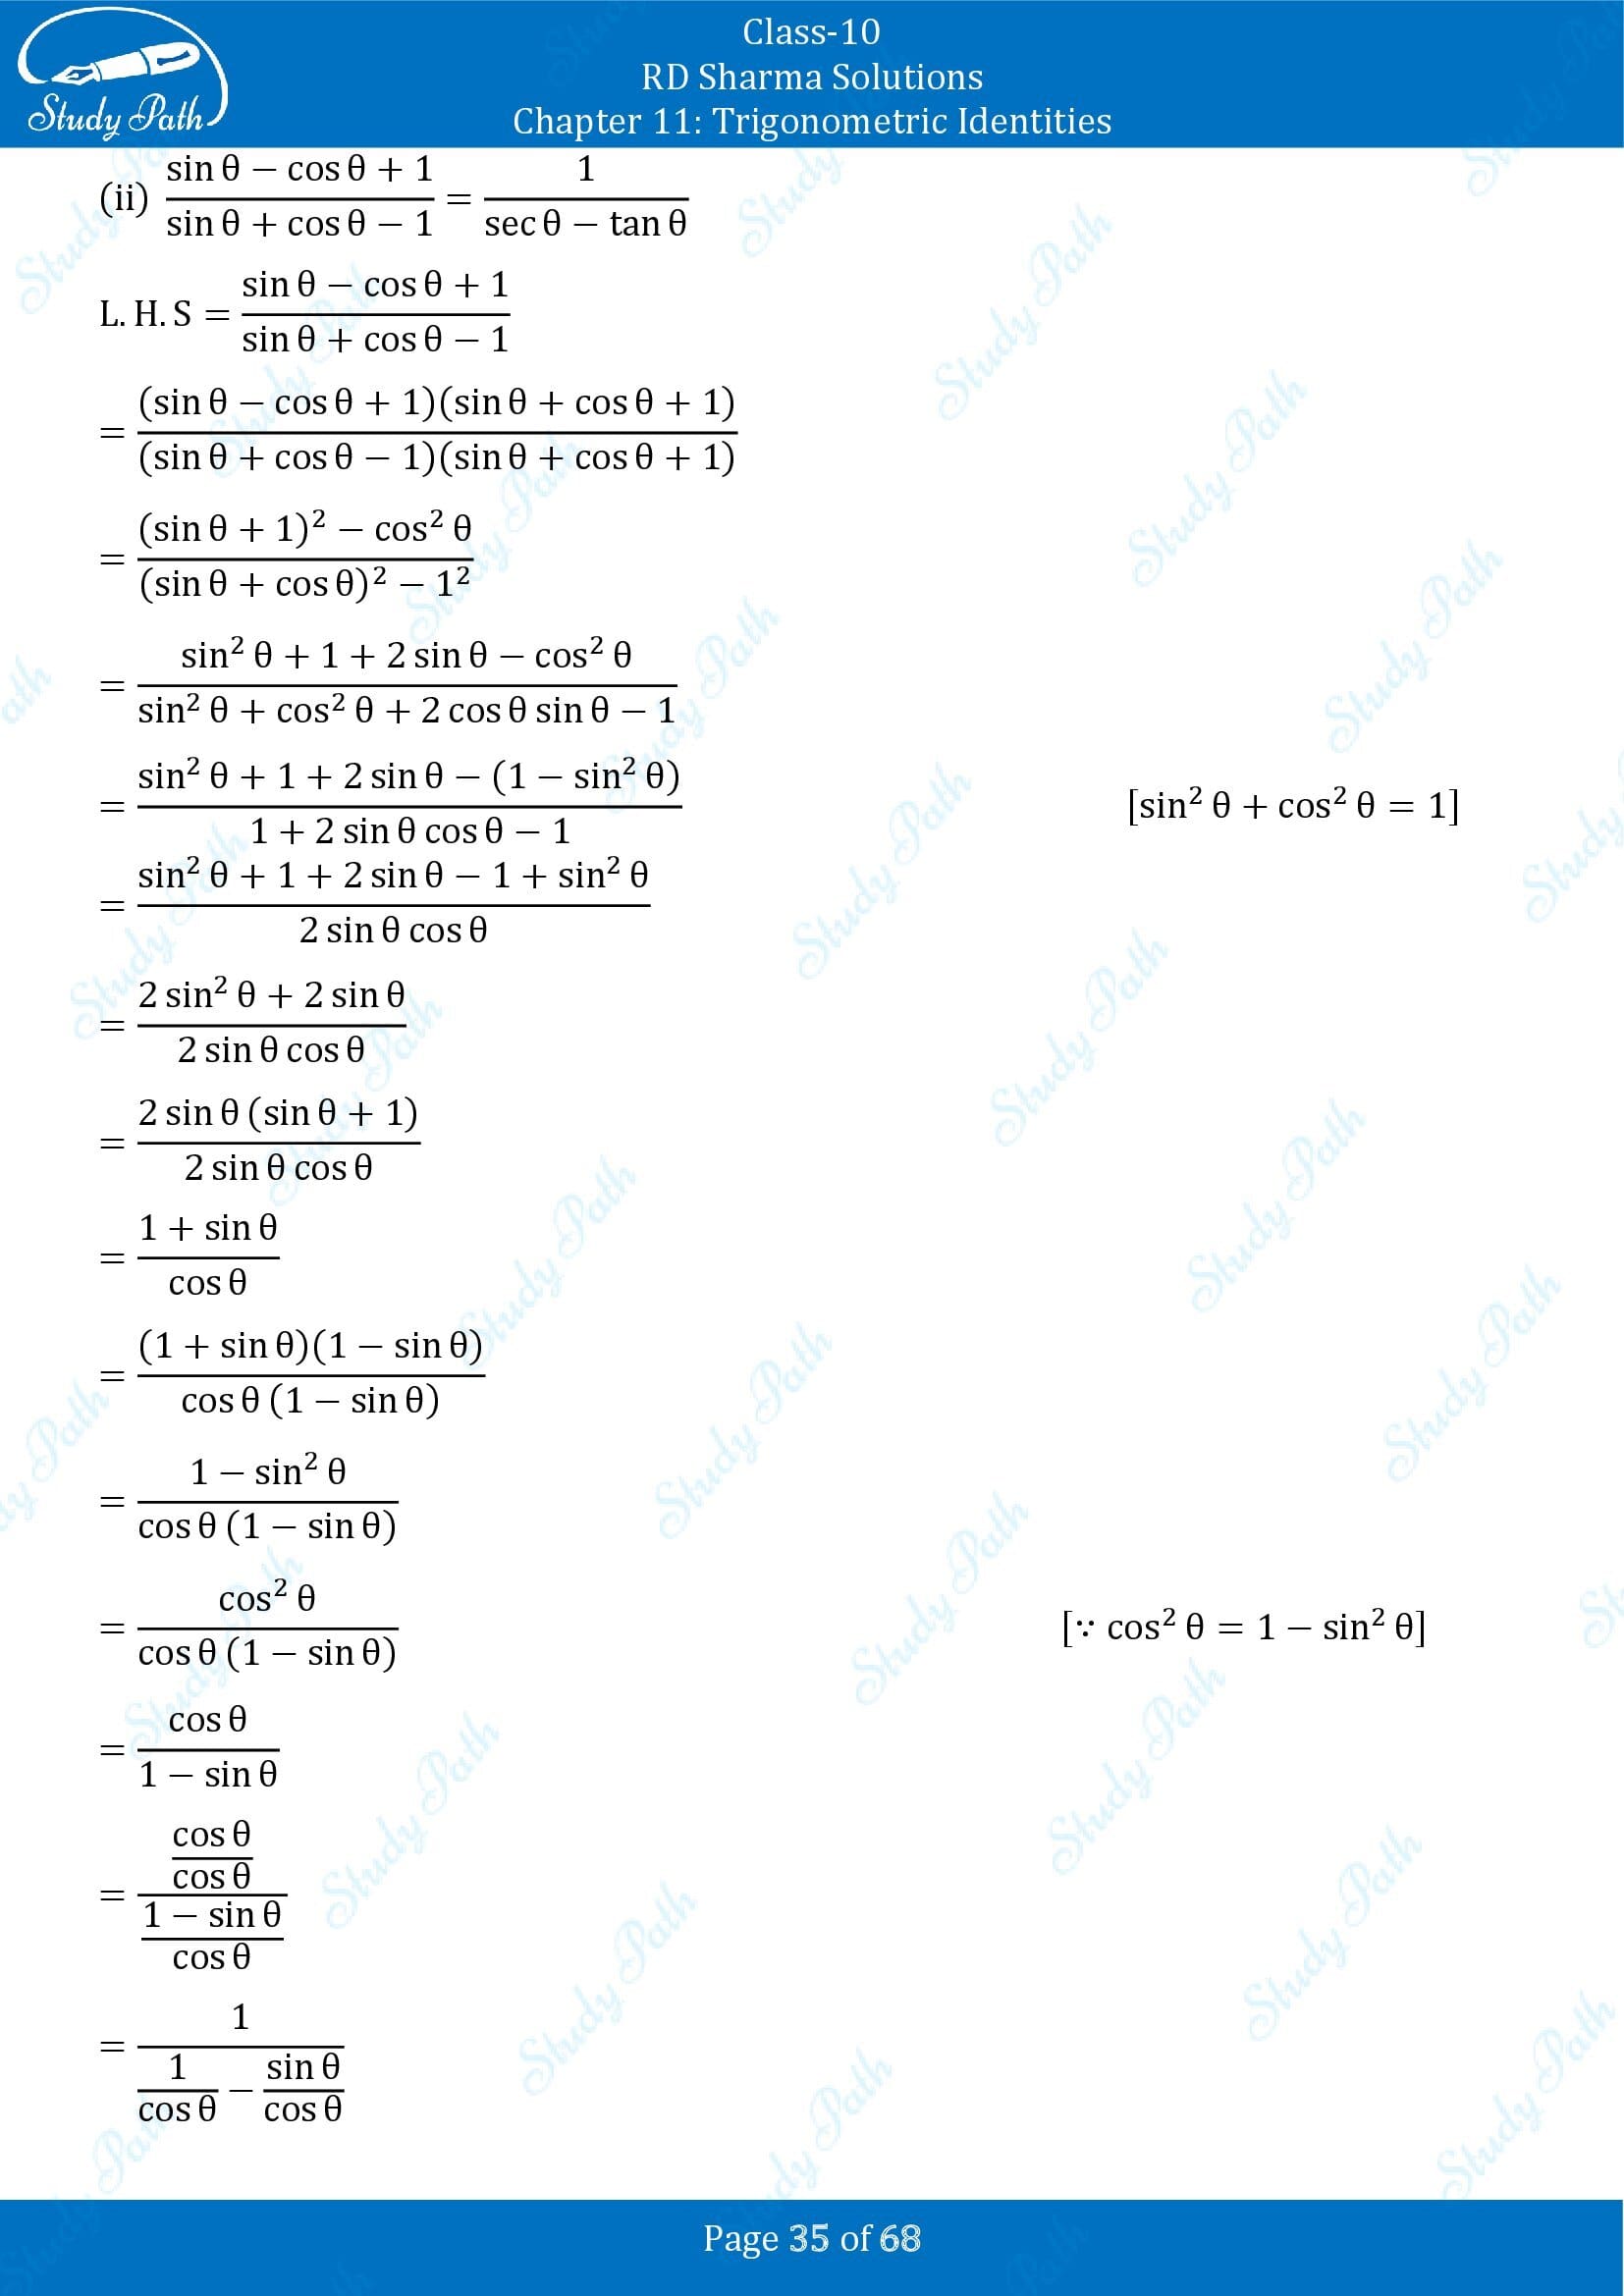 RD Sharma Solutions Class 10 Chapter 11 Trigonometric Identities Exercise 11.1 00035